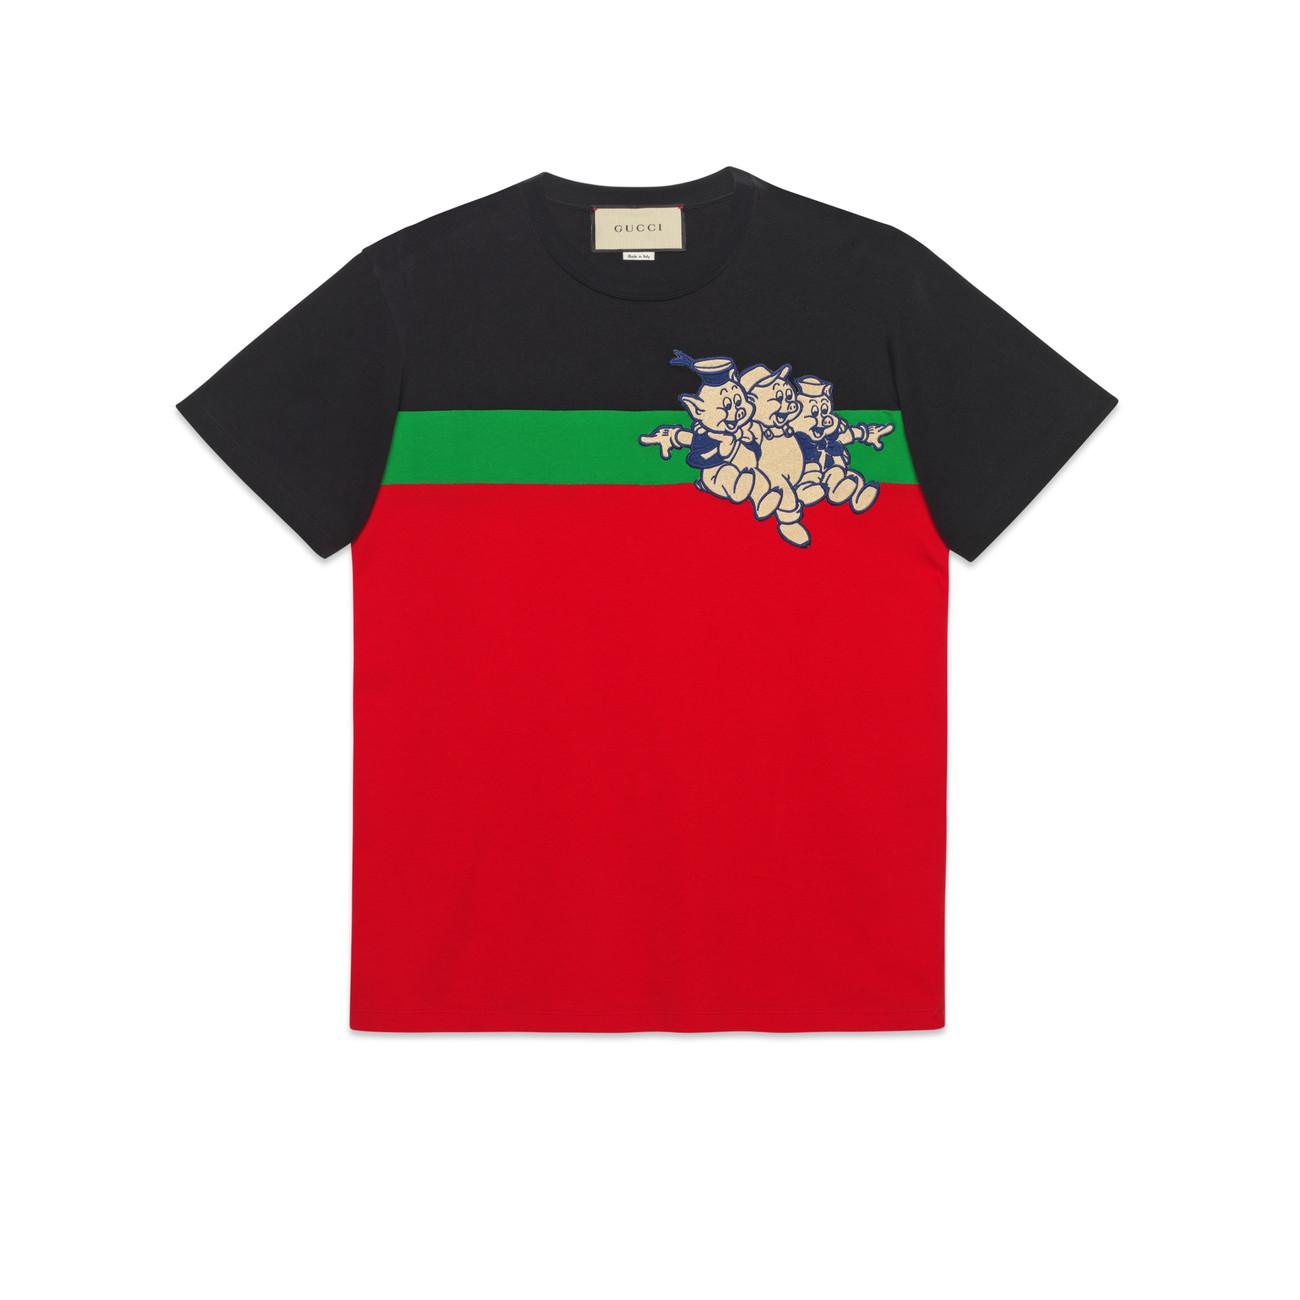 Lyst - Gucci Men's Oversize T-shirt With Three Little Pigs in Green for Men